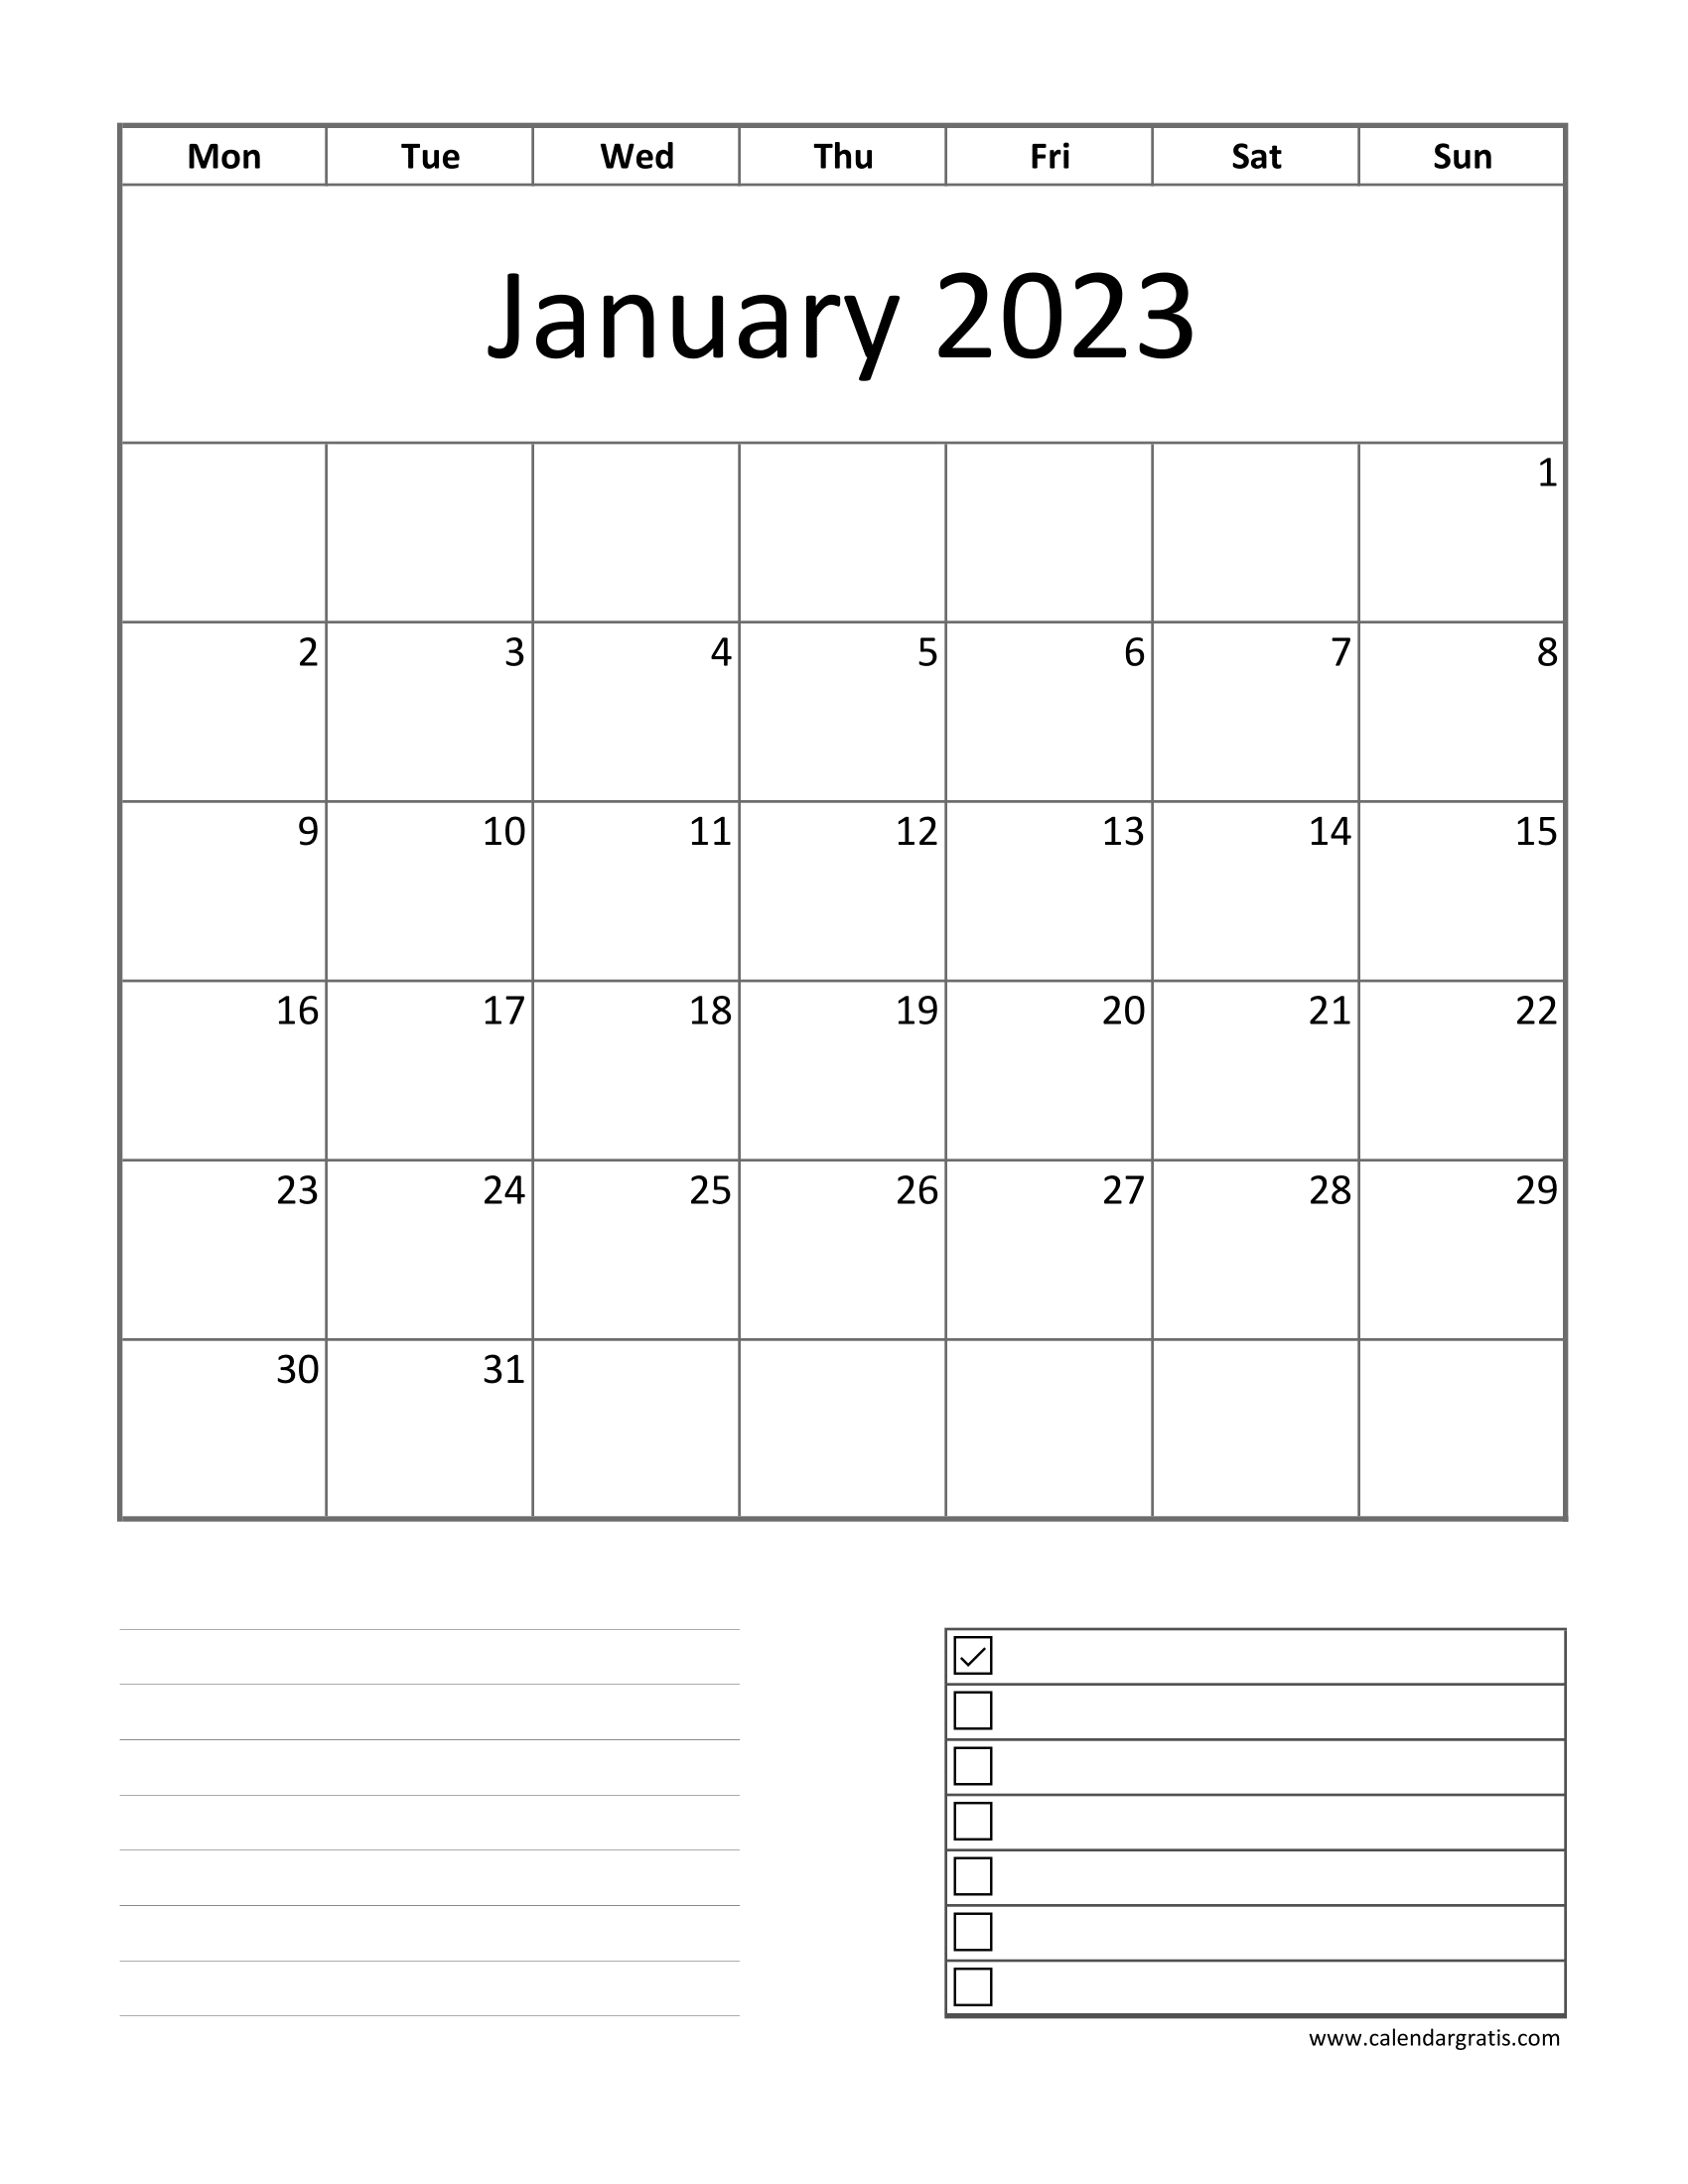 Printable Monday start calendar for January 2023 with notes and to-do list.